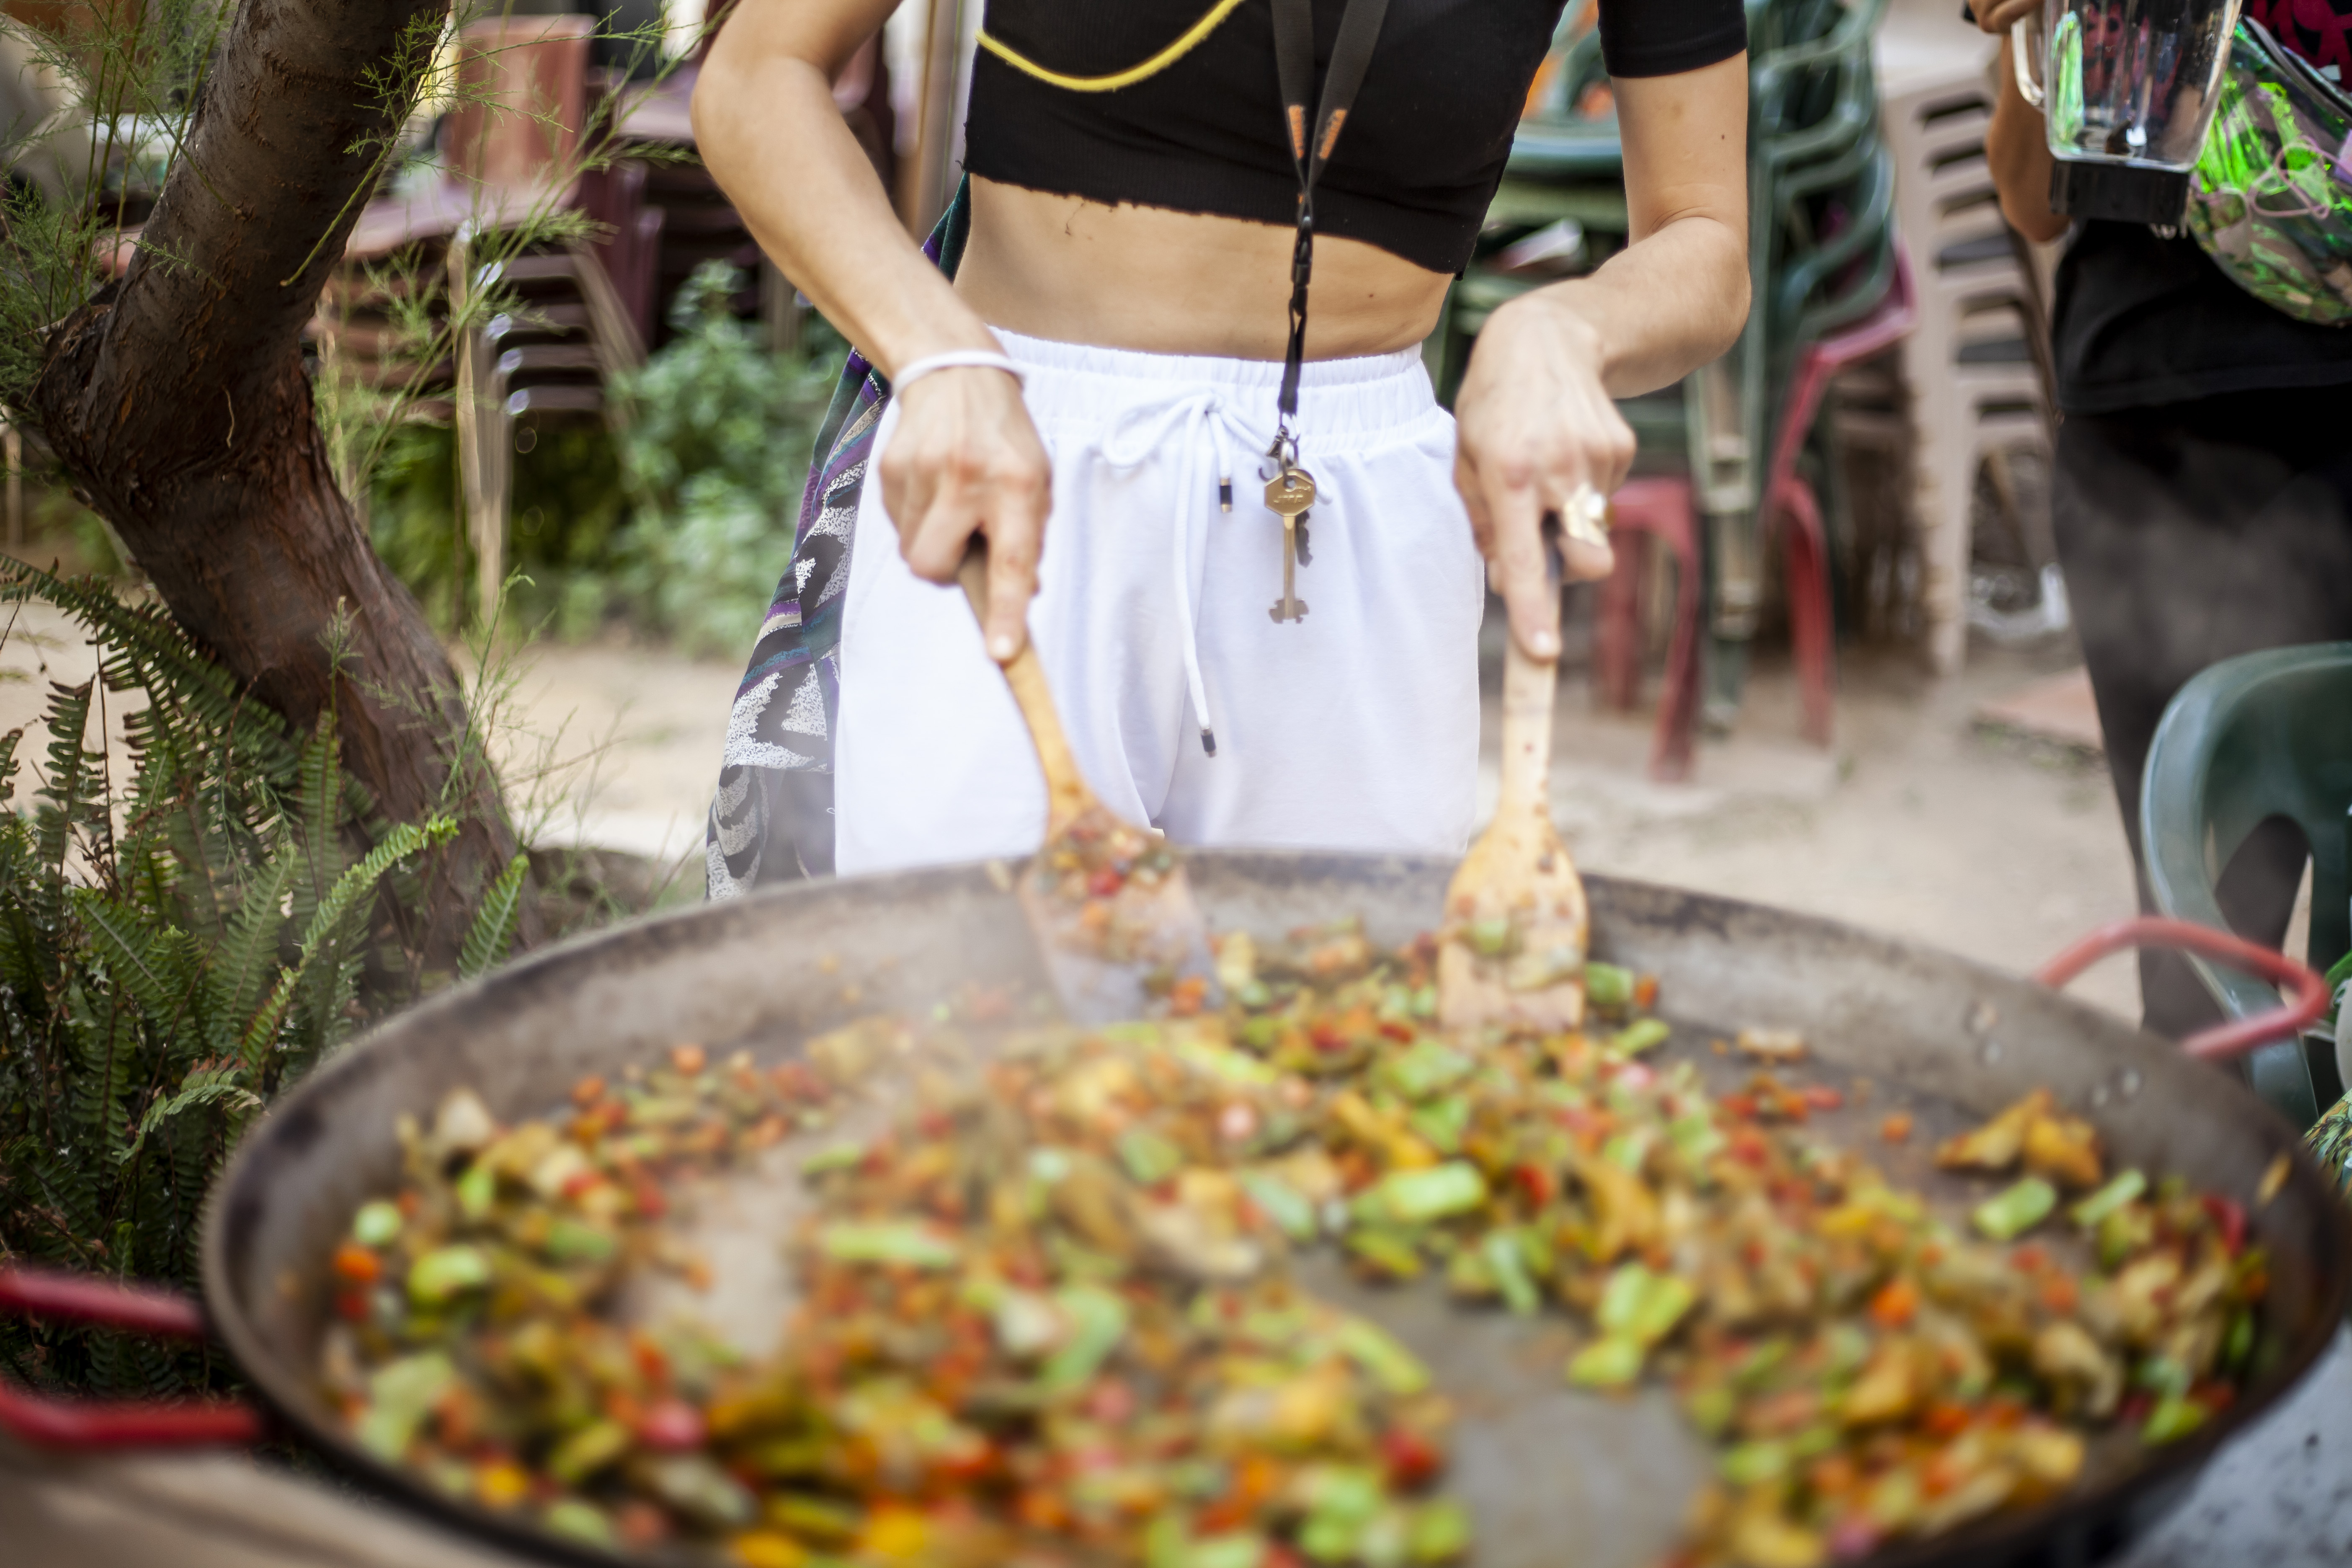 A person mixing ingredients in large paella pan